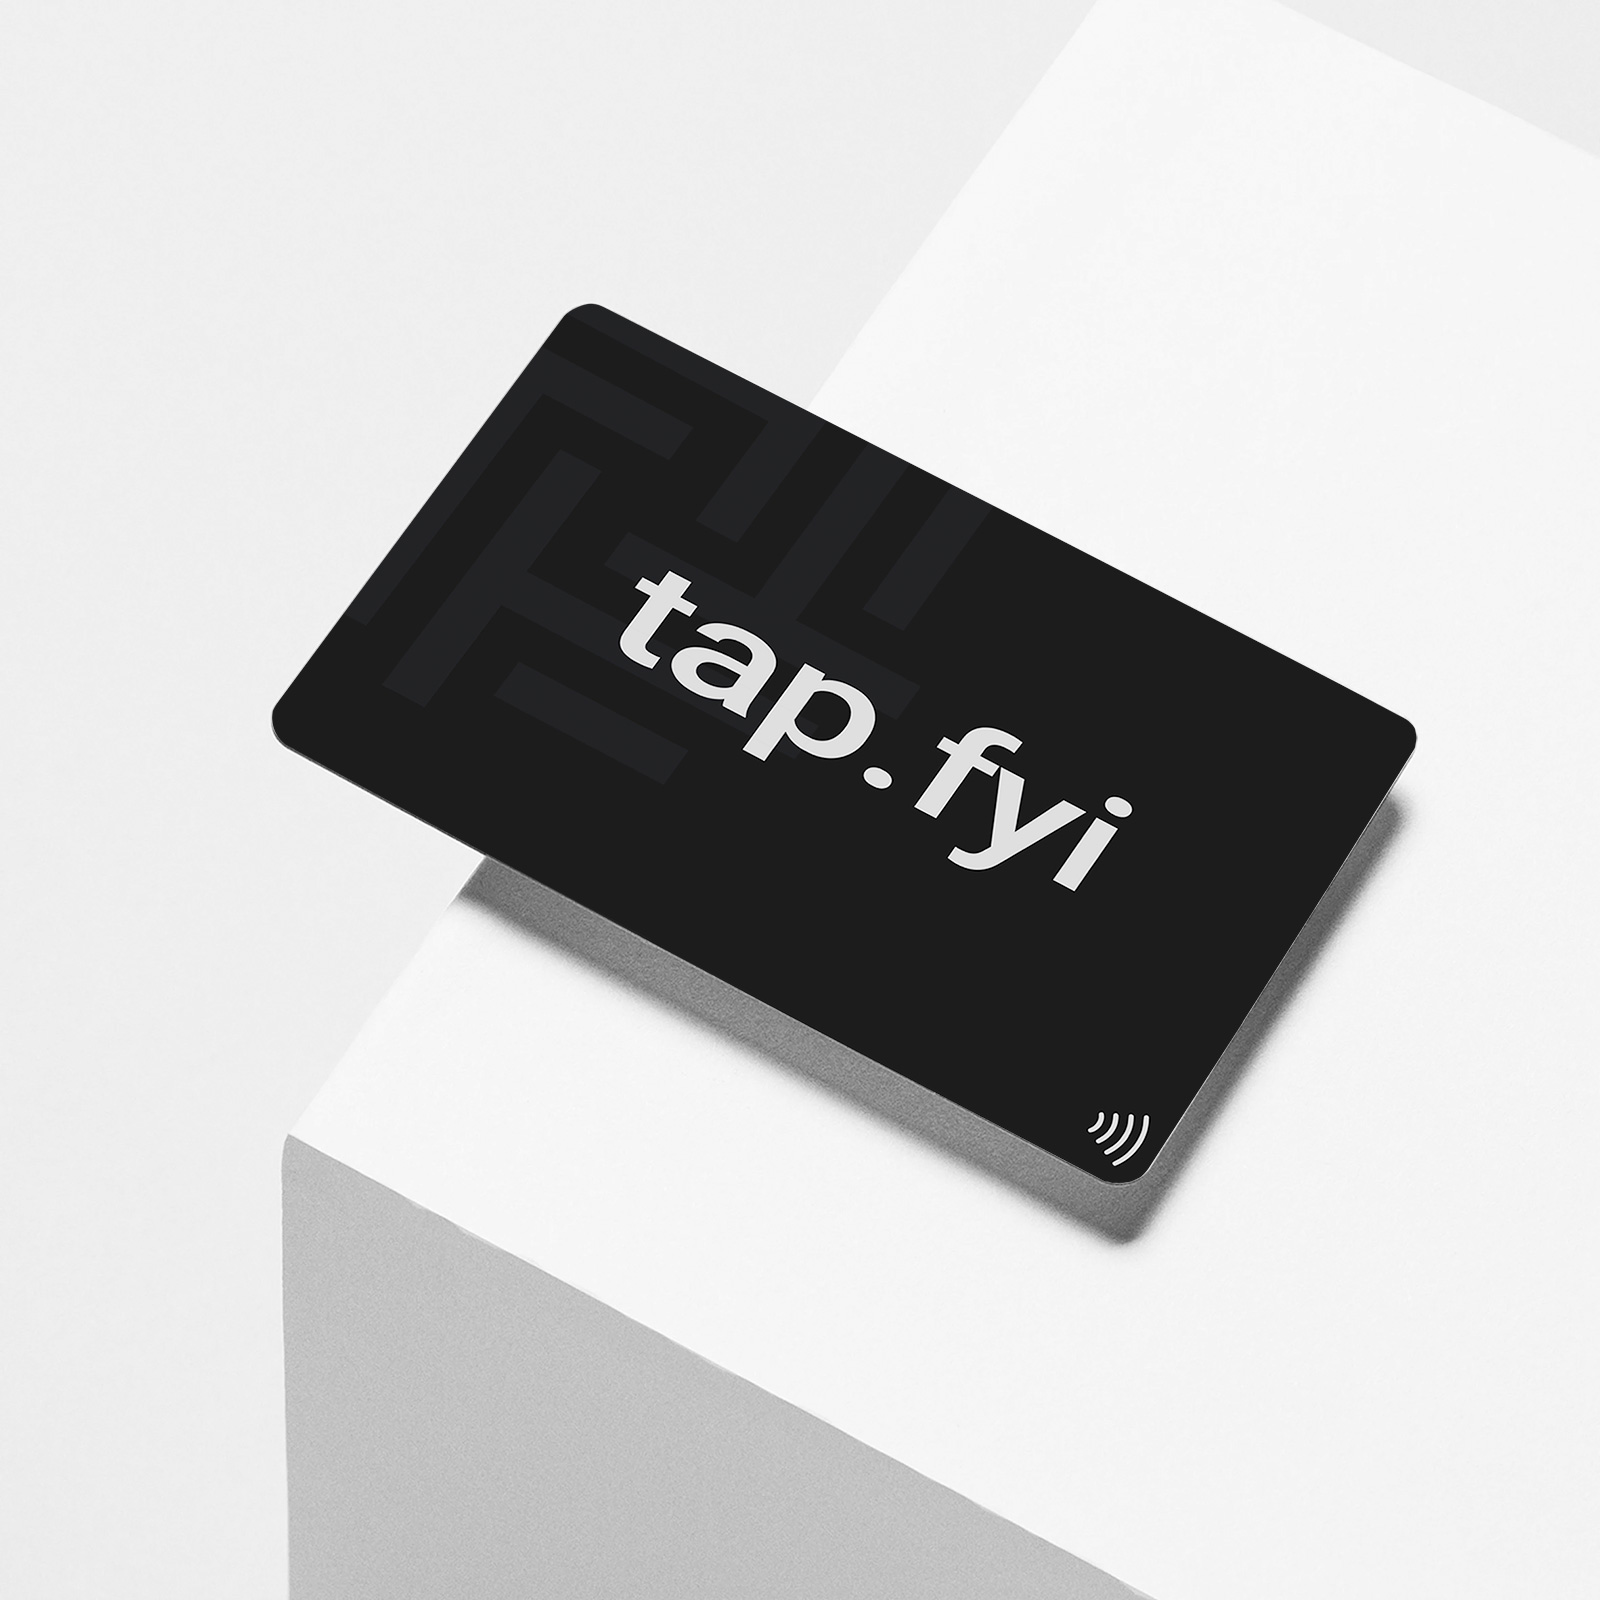 Smart tag with NFC and QR-code